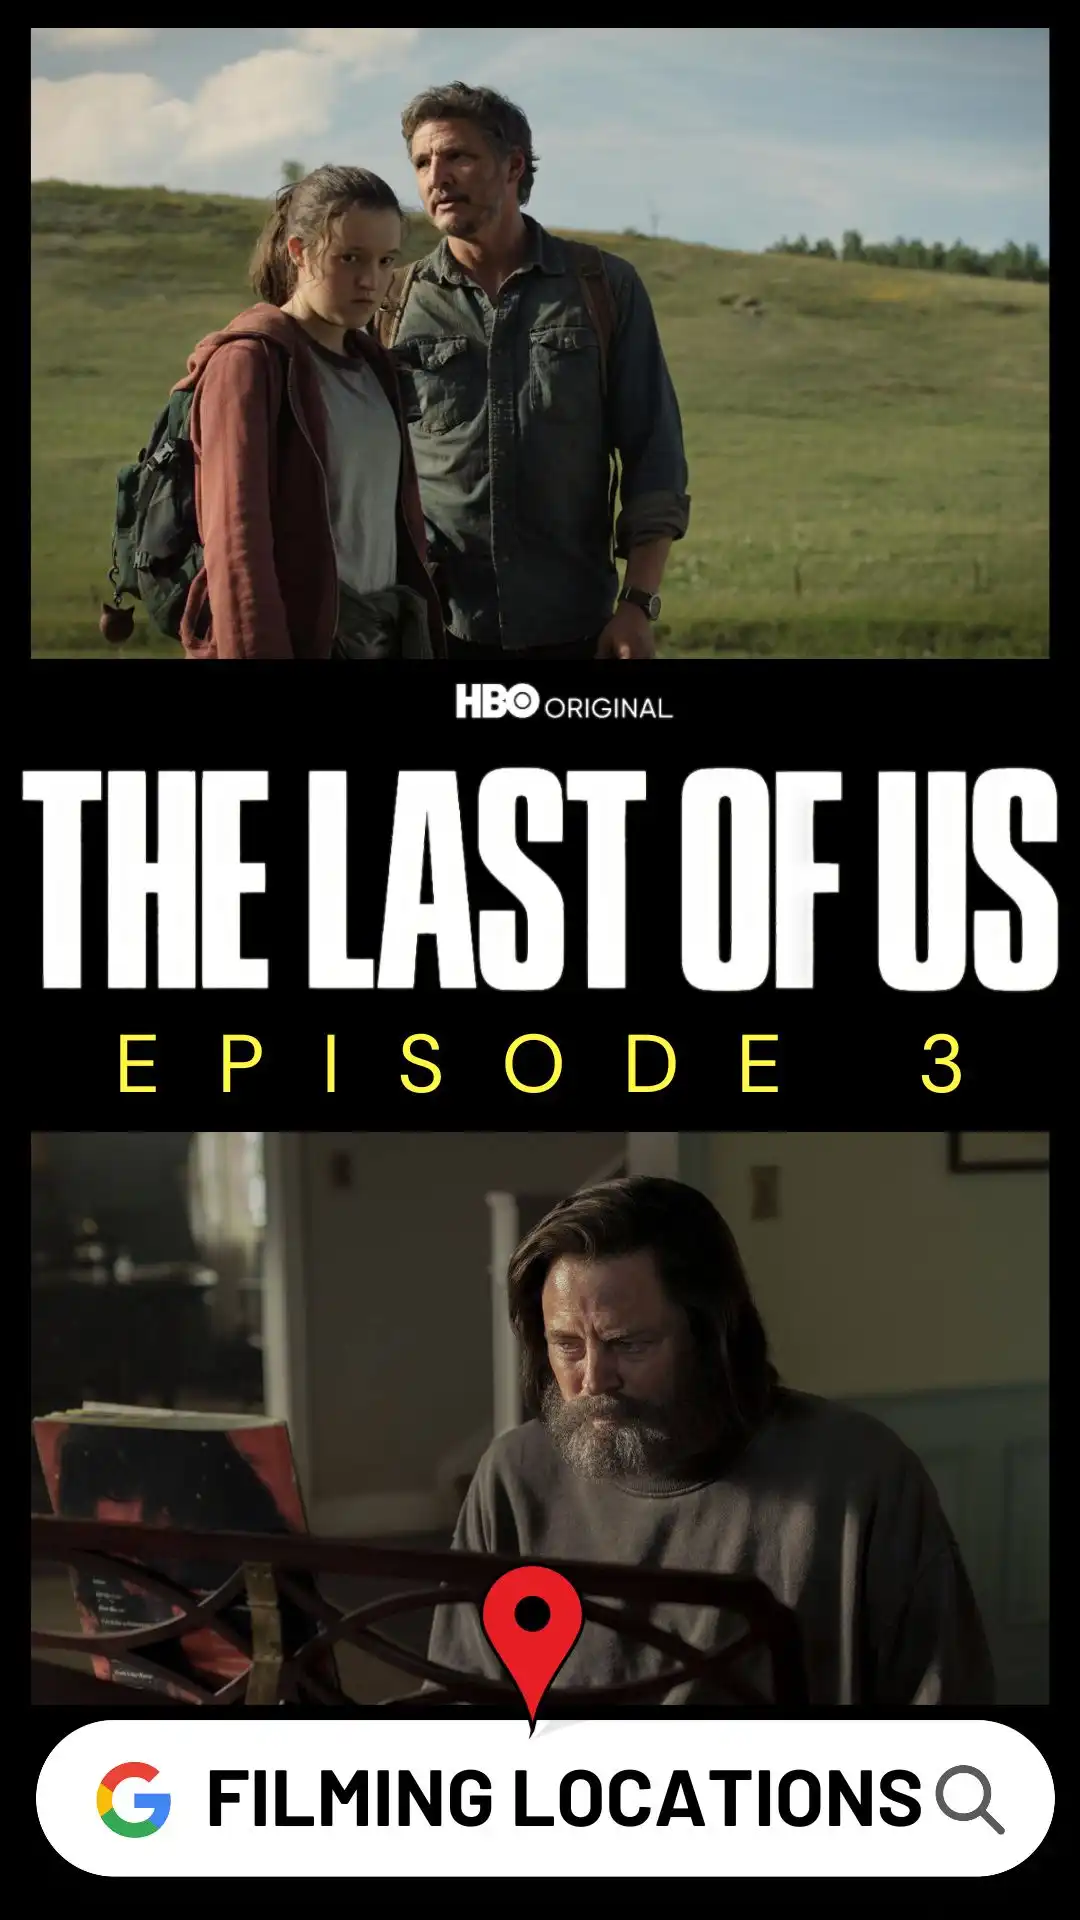 The Last of Us Episode 3 Filming Locations